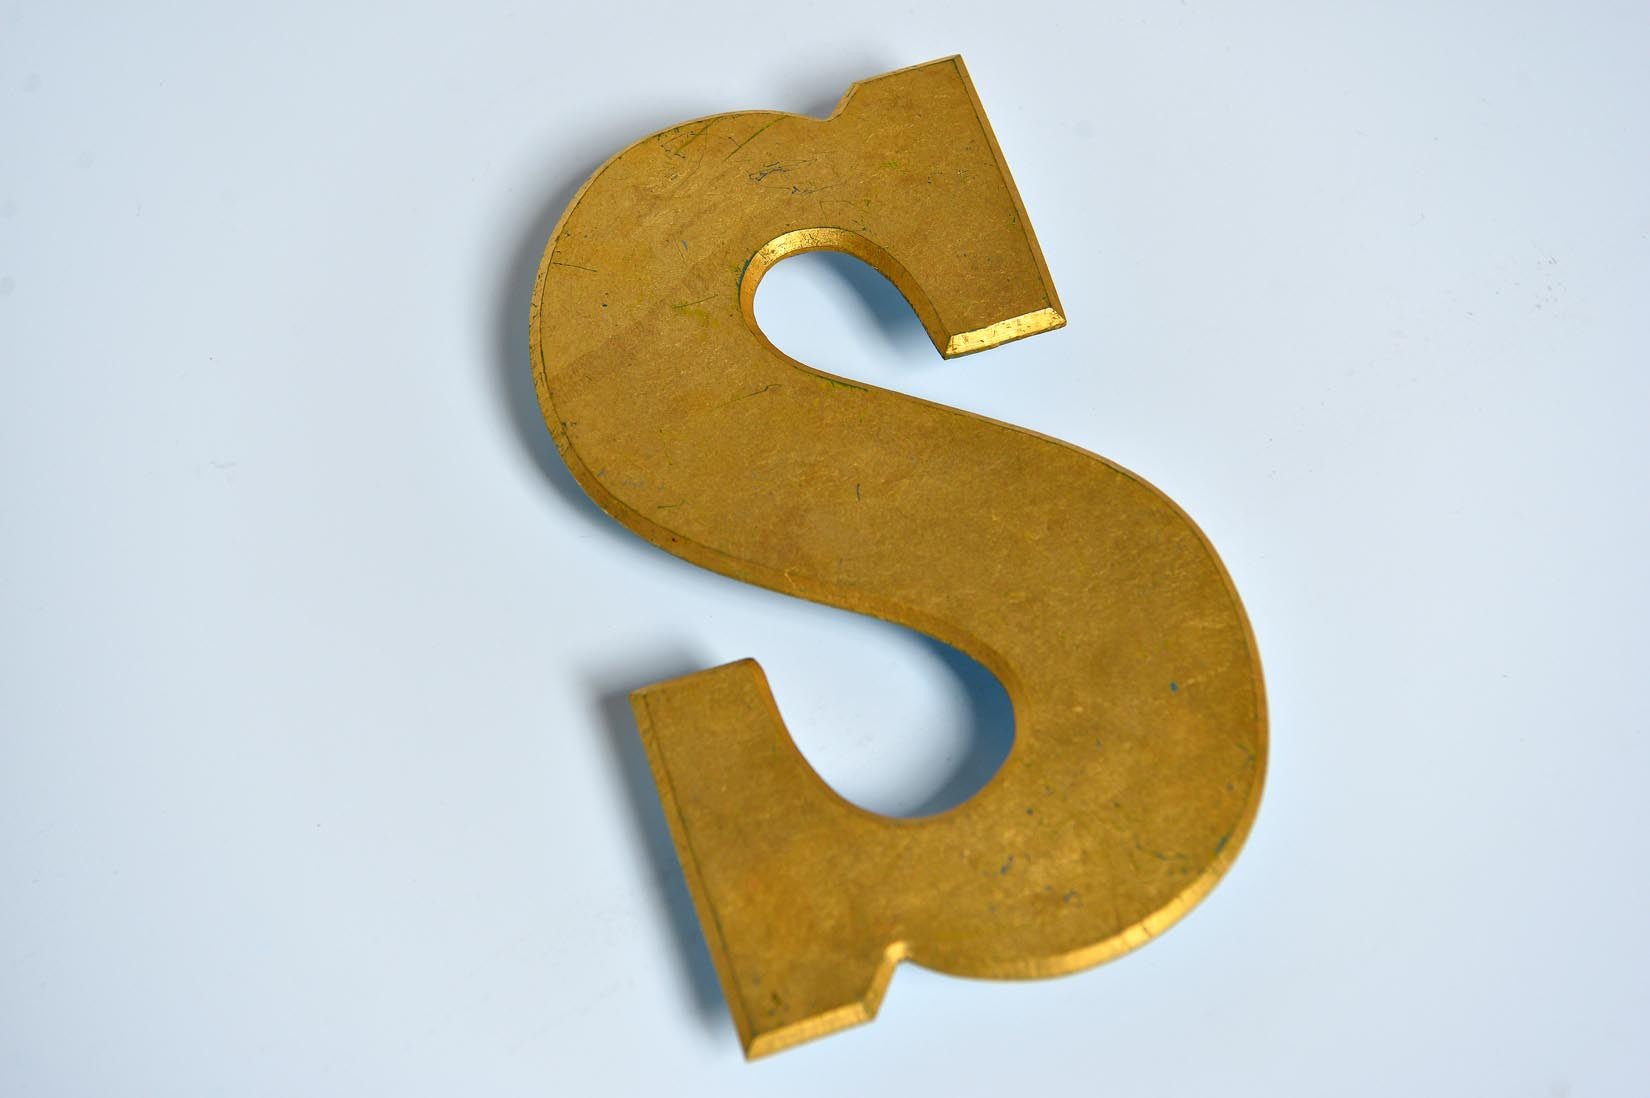 Gold distressed style vintage letters - Natalia Willmott